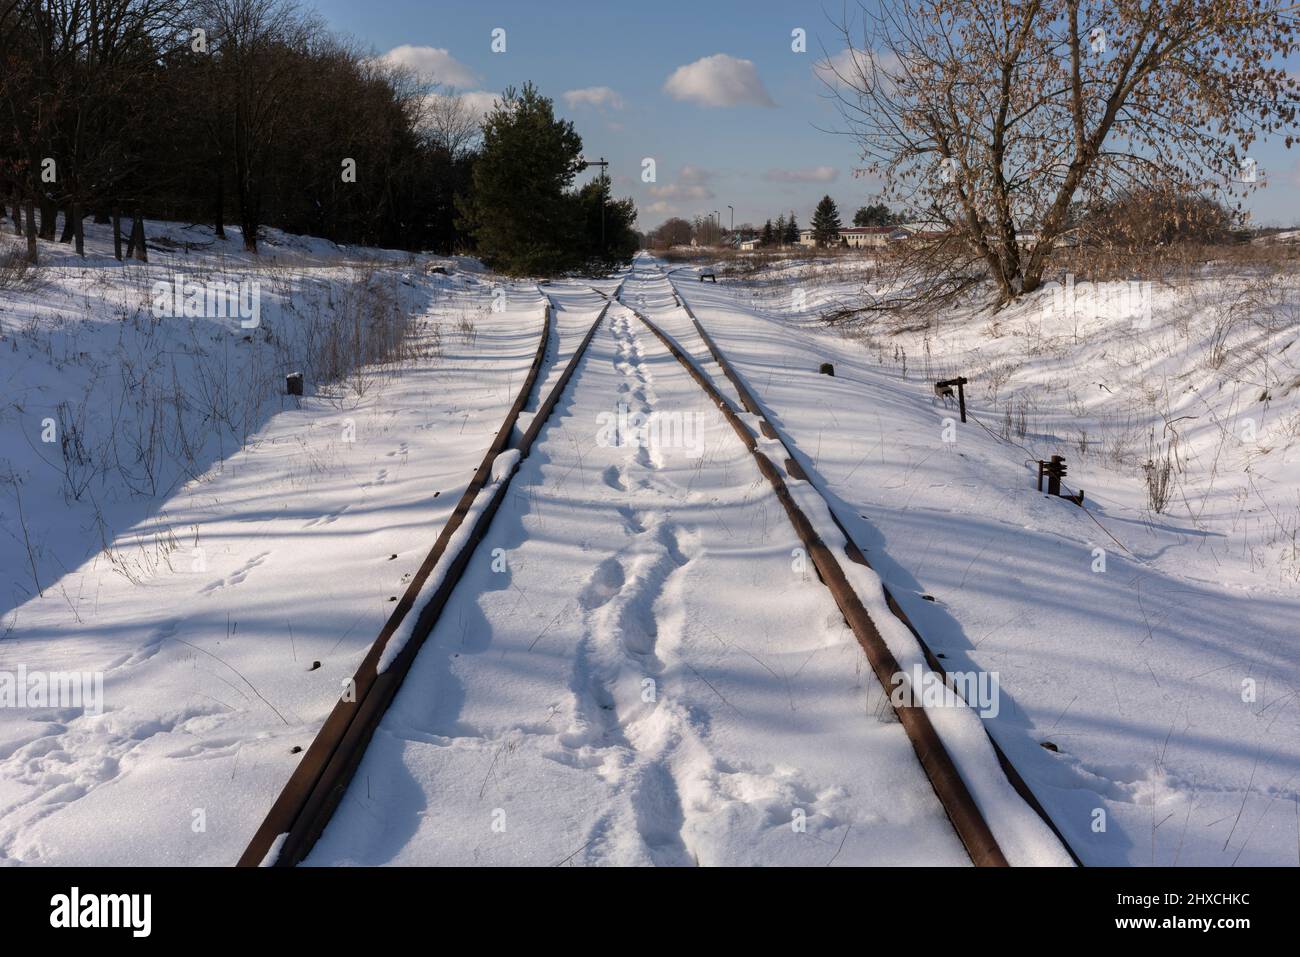 Old unused railway tracks in winter, snowy landscape, traces of people in the snow Stock Photo